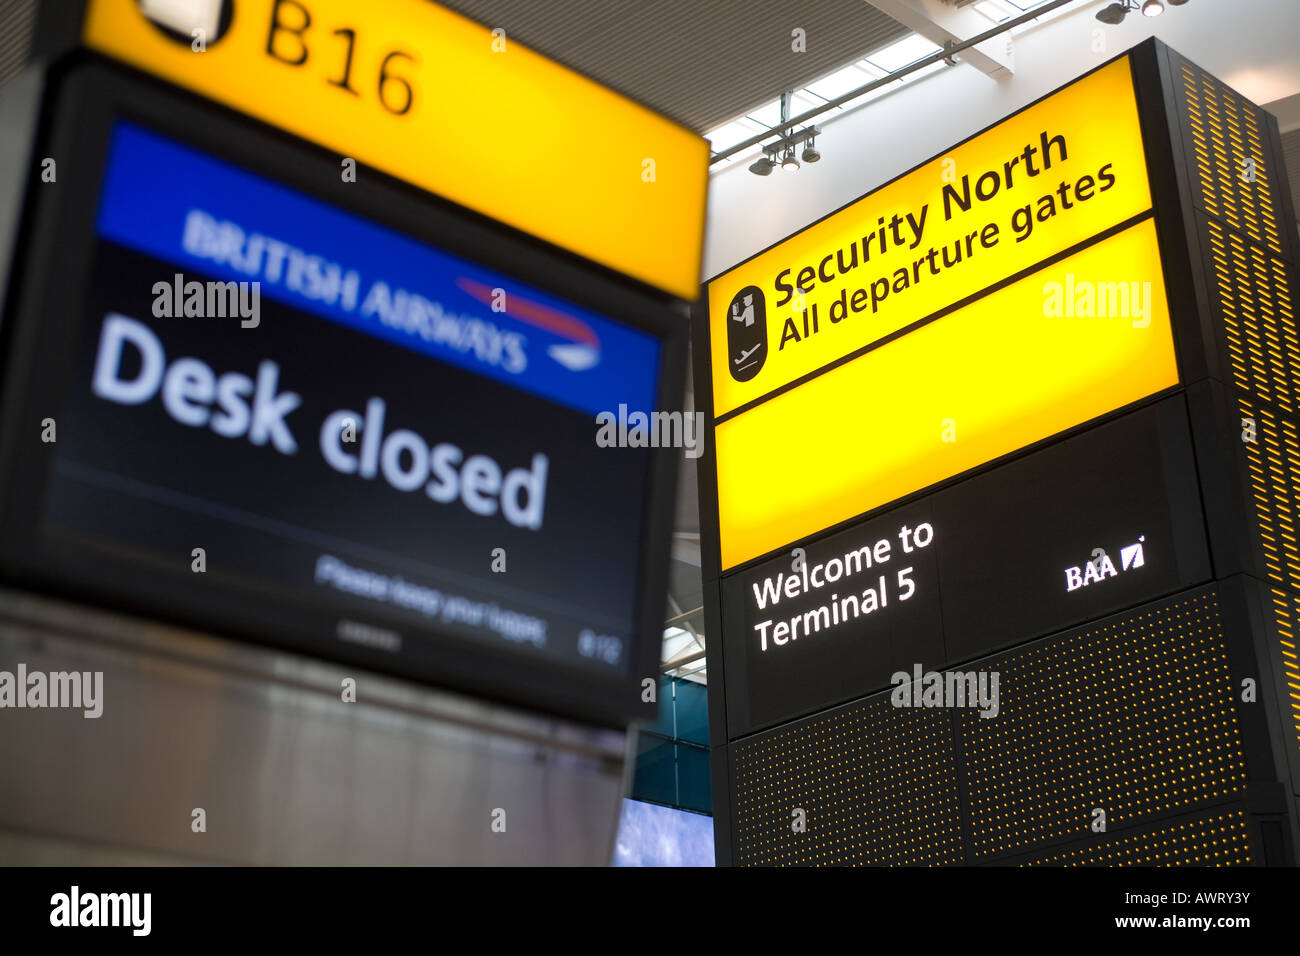 Security Notice and fast bag drop desk closed sign at London Heathrow Airport Terminal 5 Stock Photo